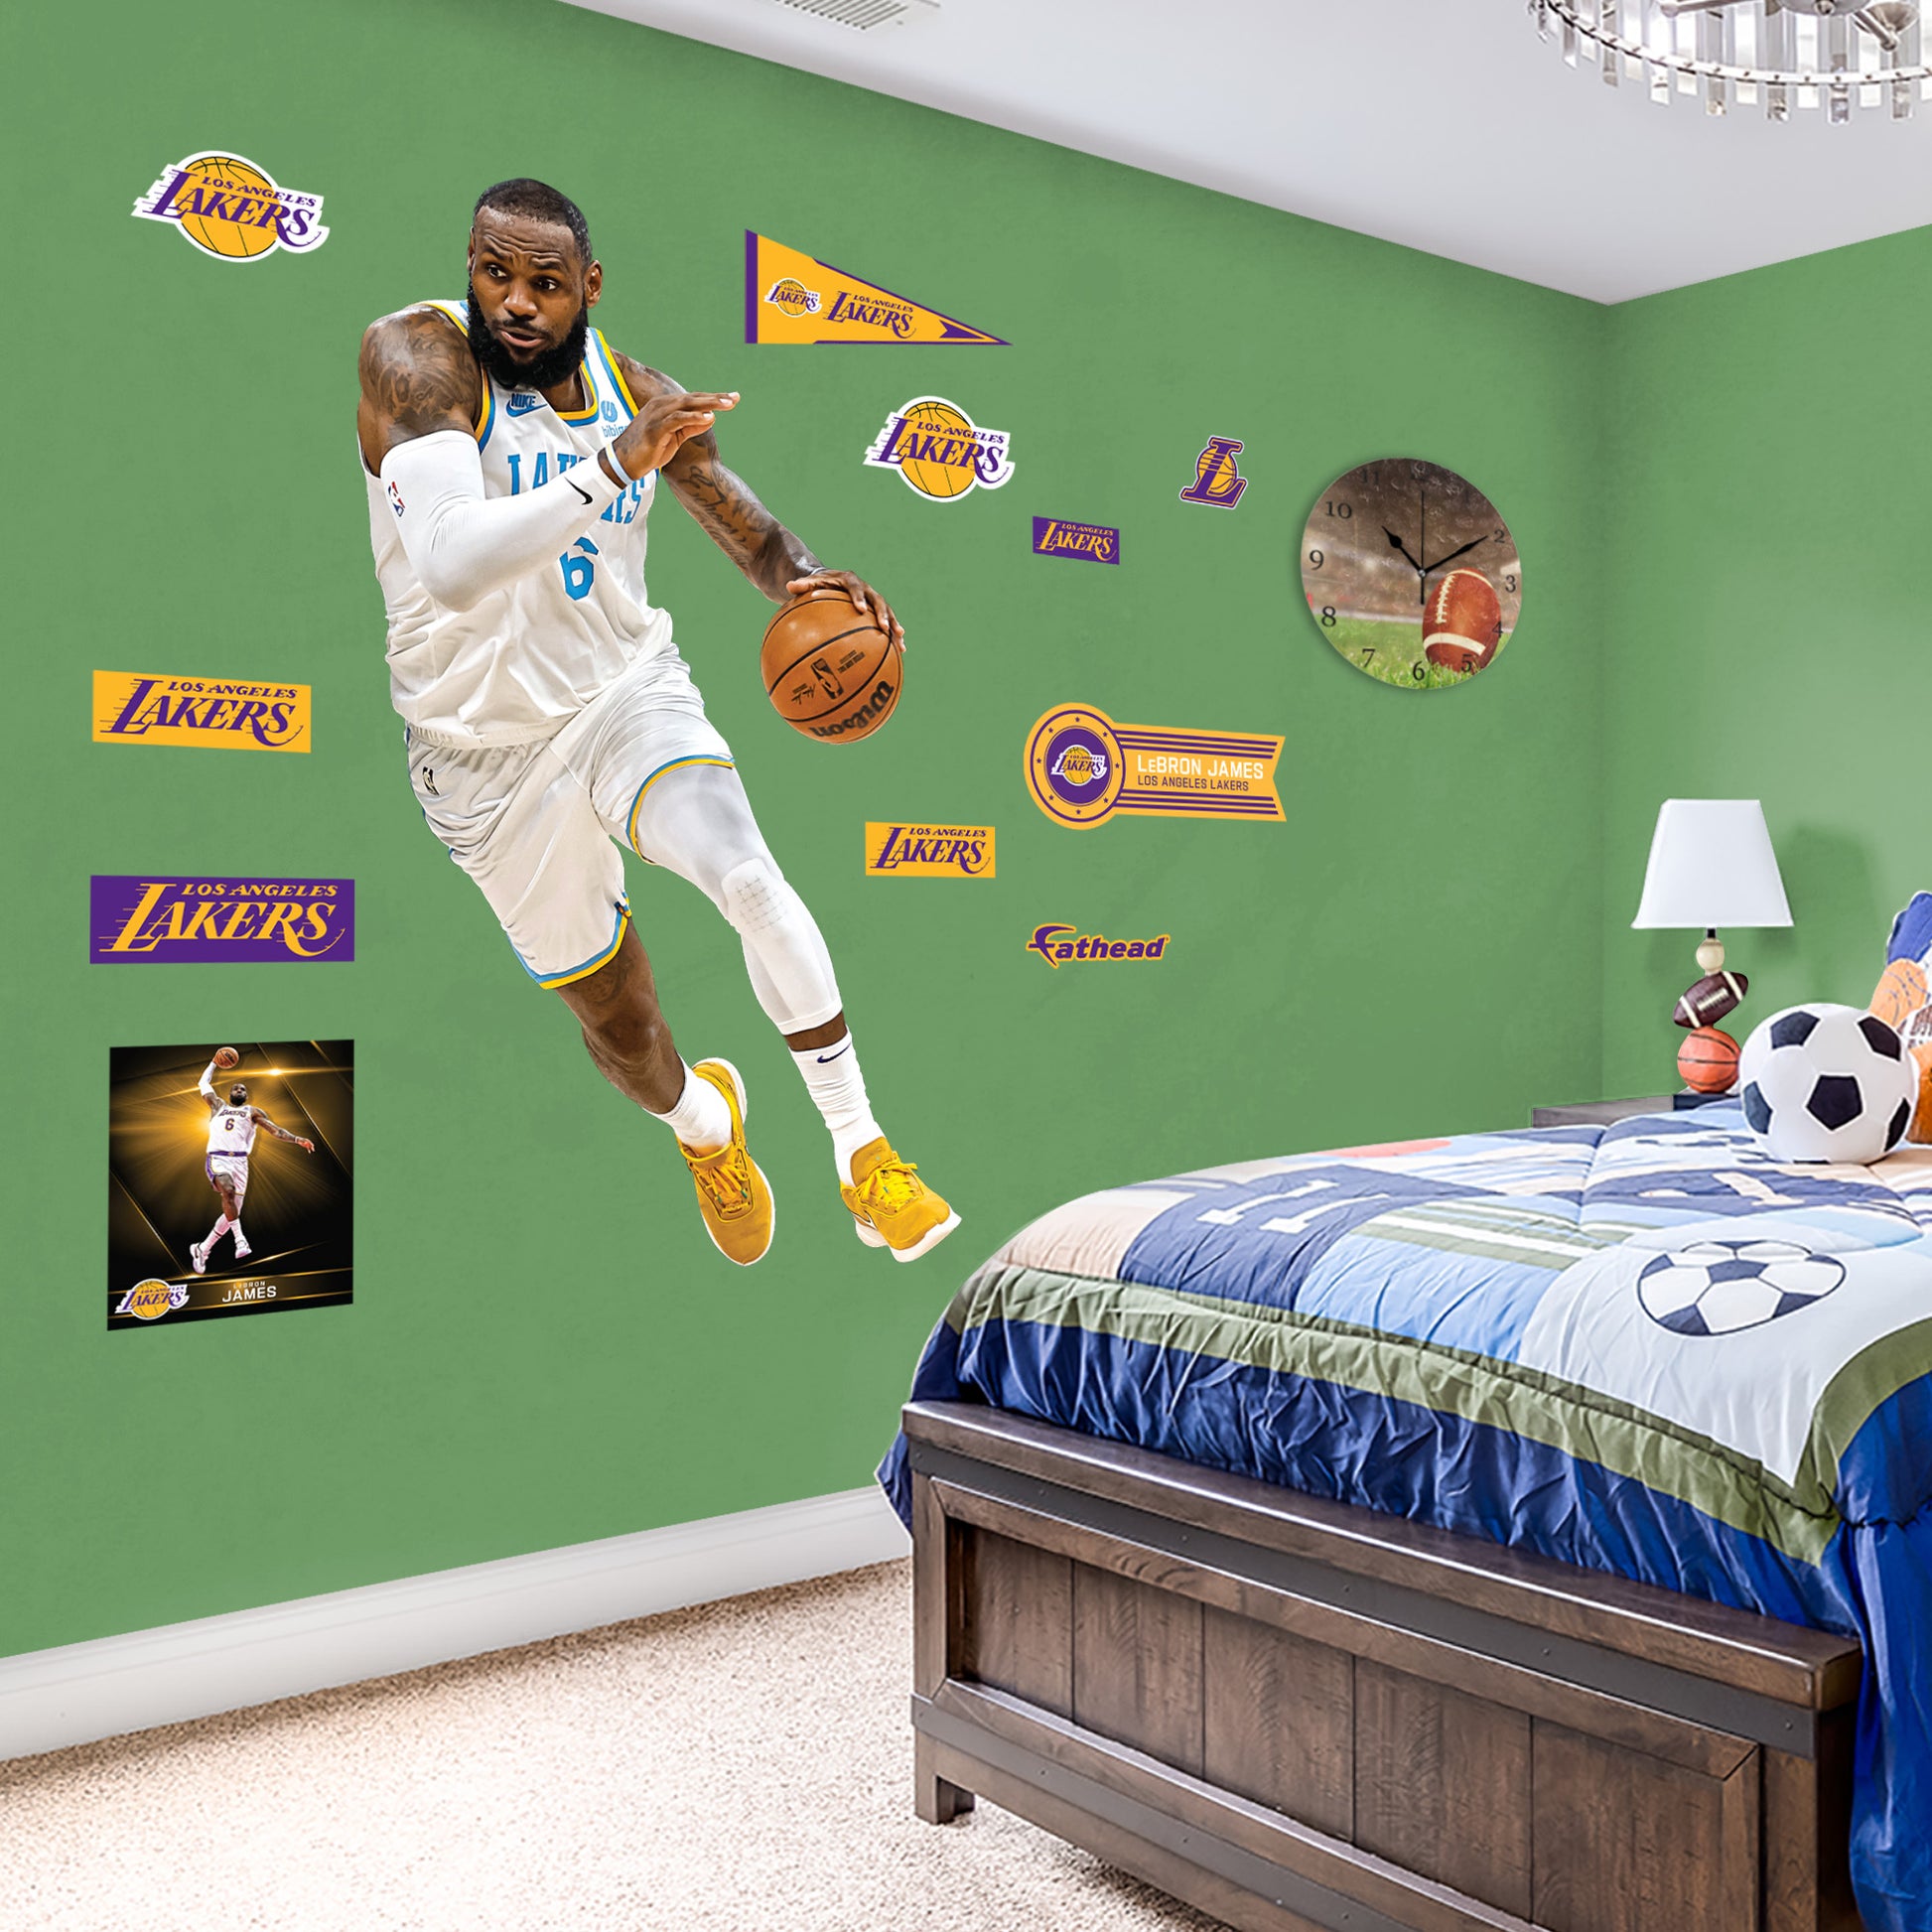 LeBron James for Los Angeles Lakers: Black Jersey - NBA Removable Wall Decal Life-Size Athlete + 2 Wall Decals 45W x 78H